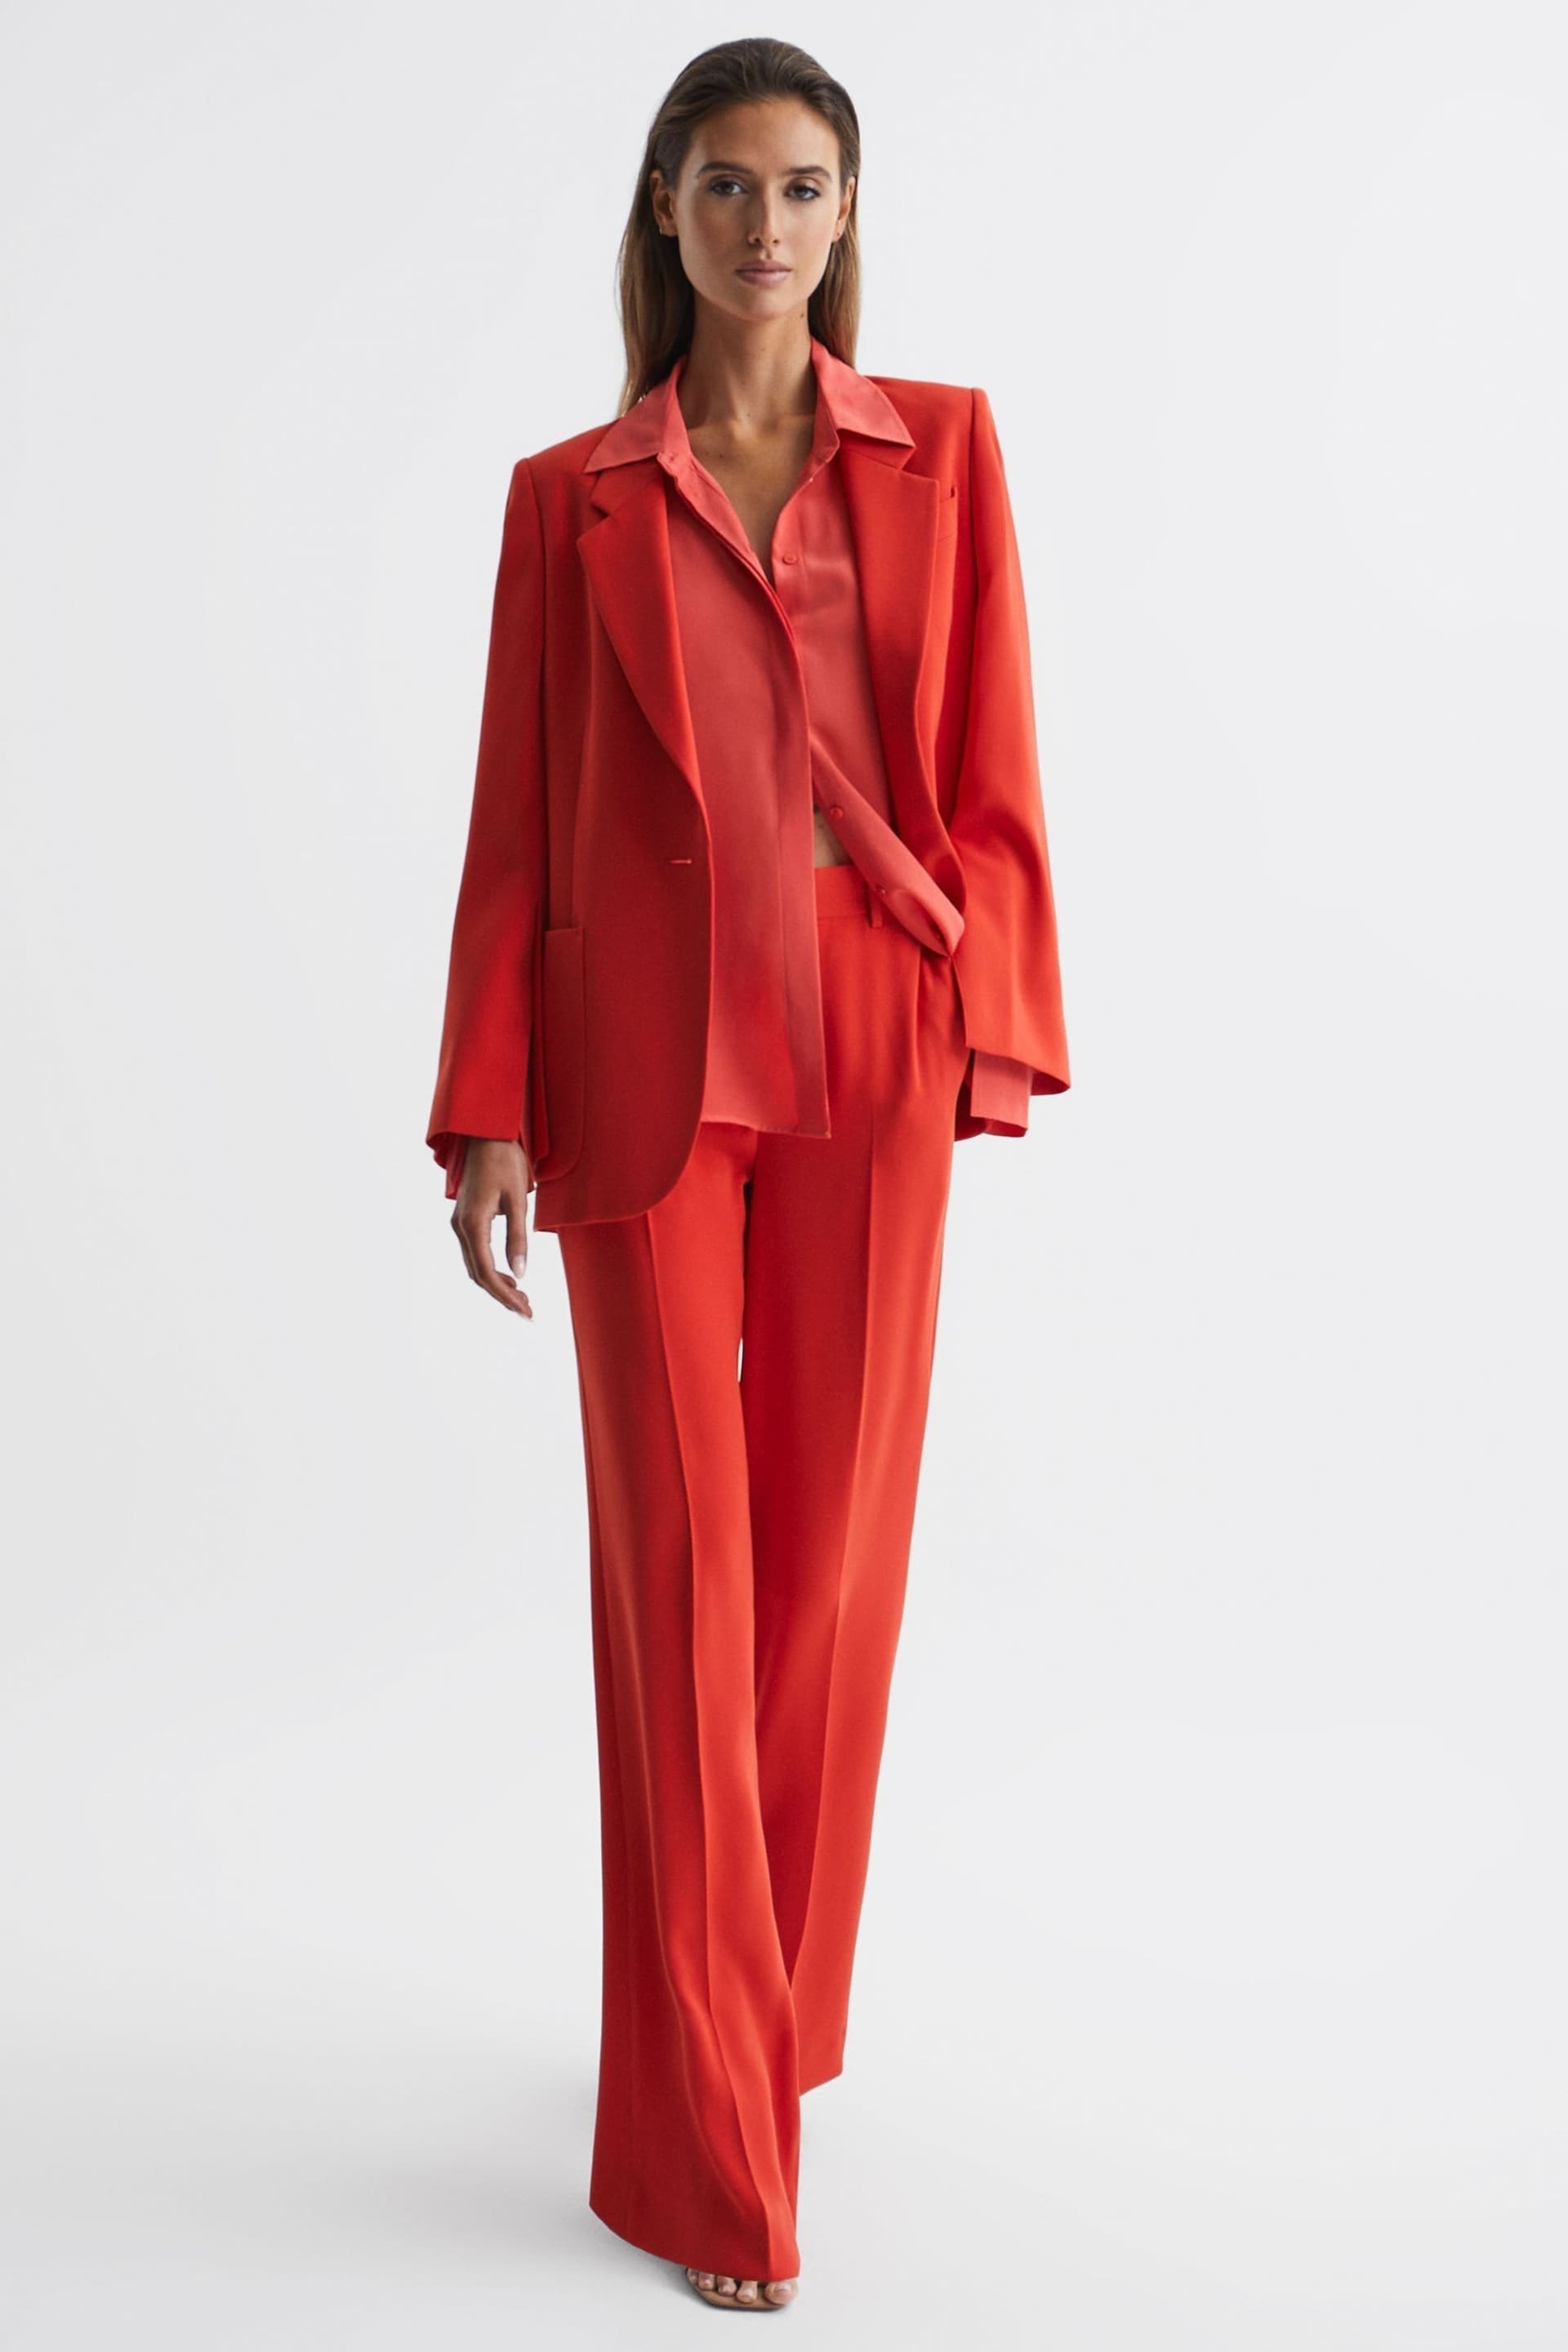 Reiss Coral Maia Wide Leg Trousers - Image 6 of 6